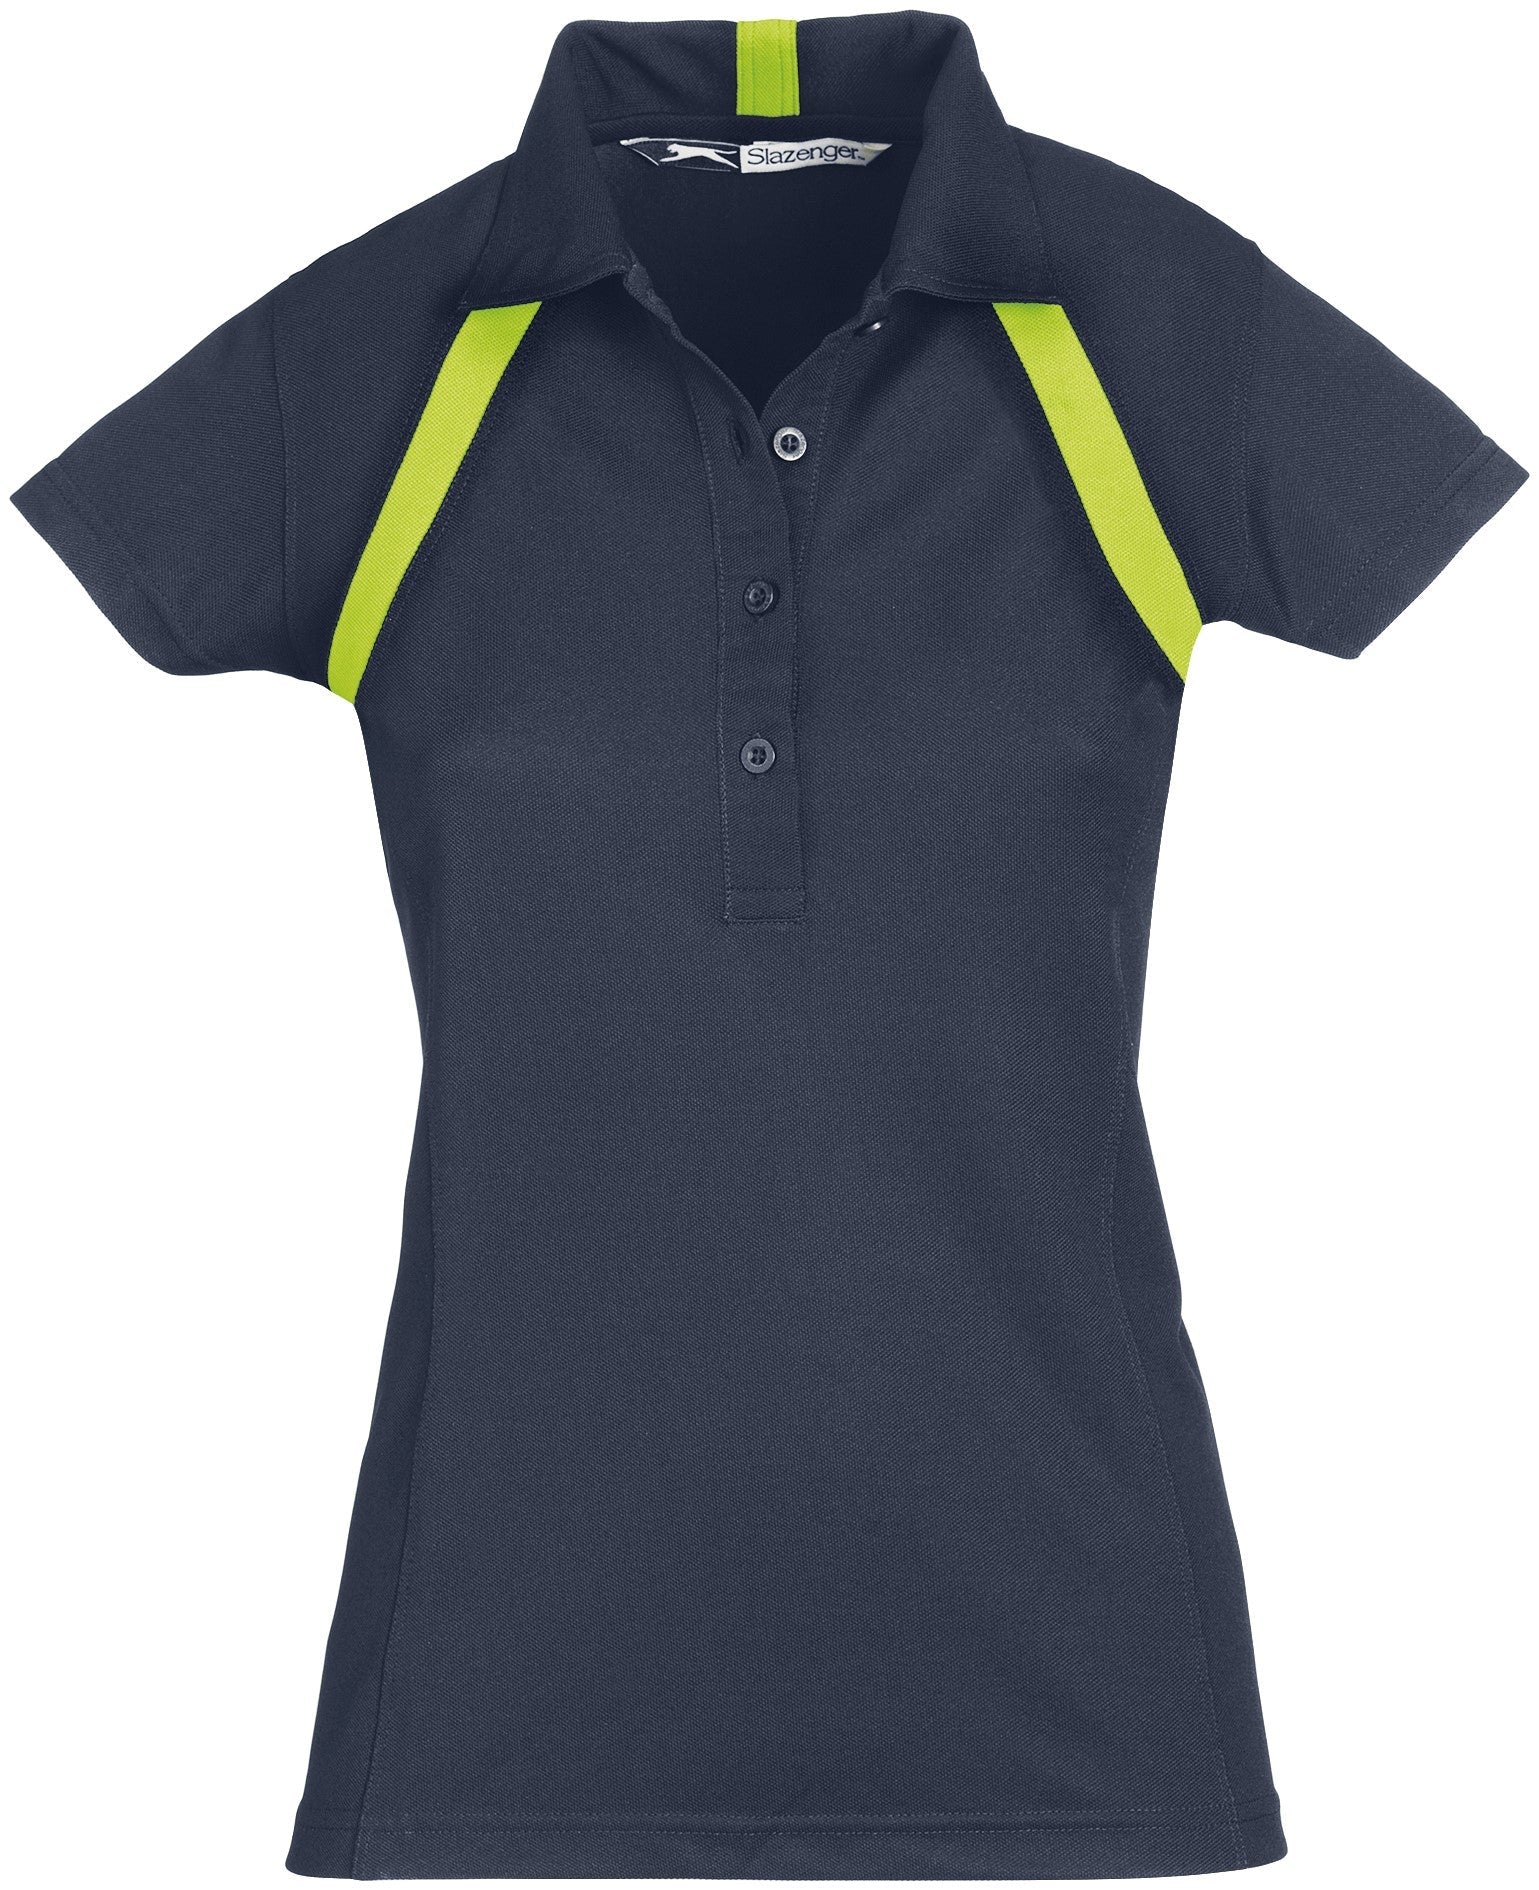 Ladies Jebel Golf Shirt - Red Only-